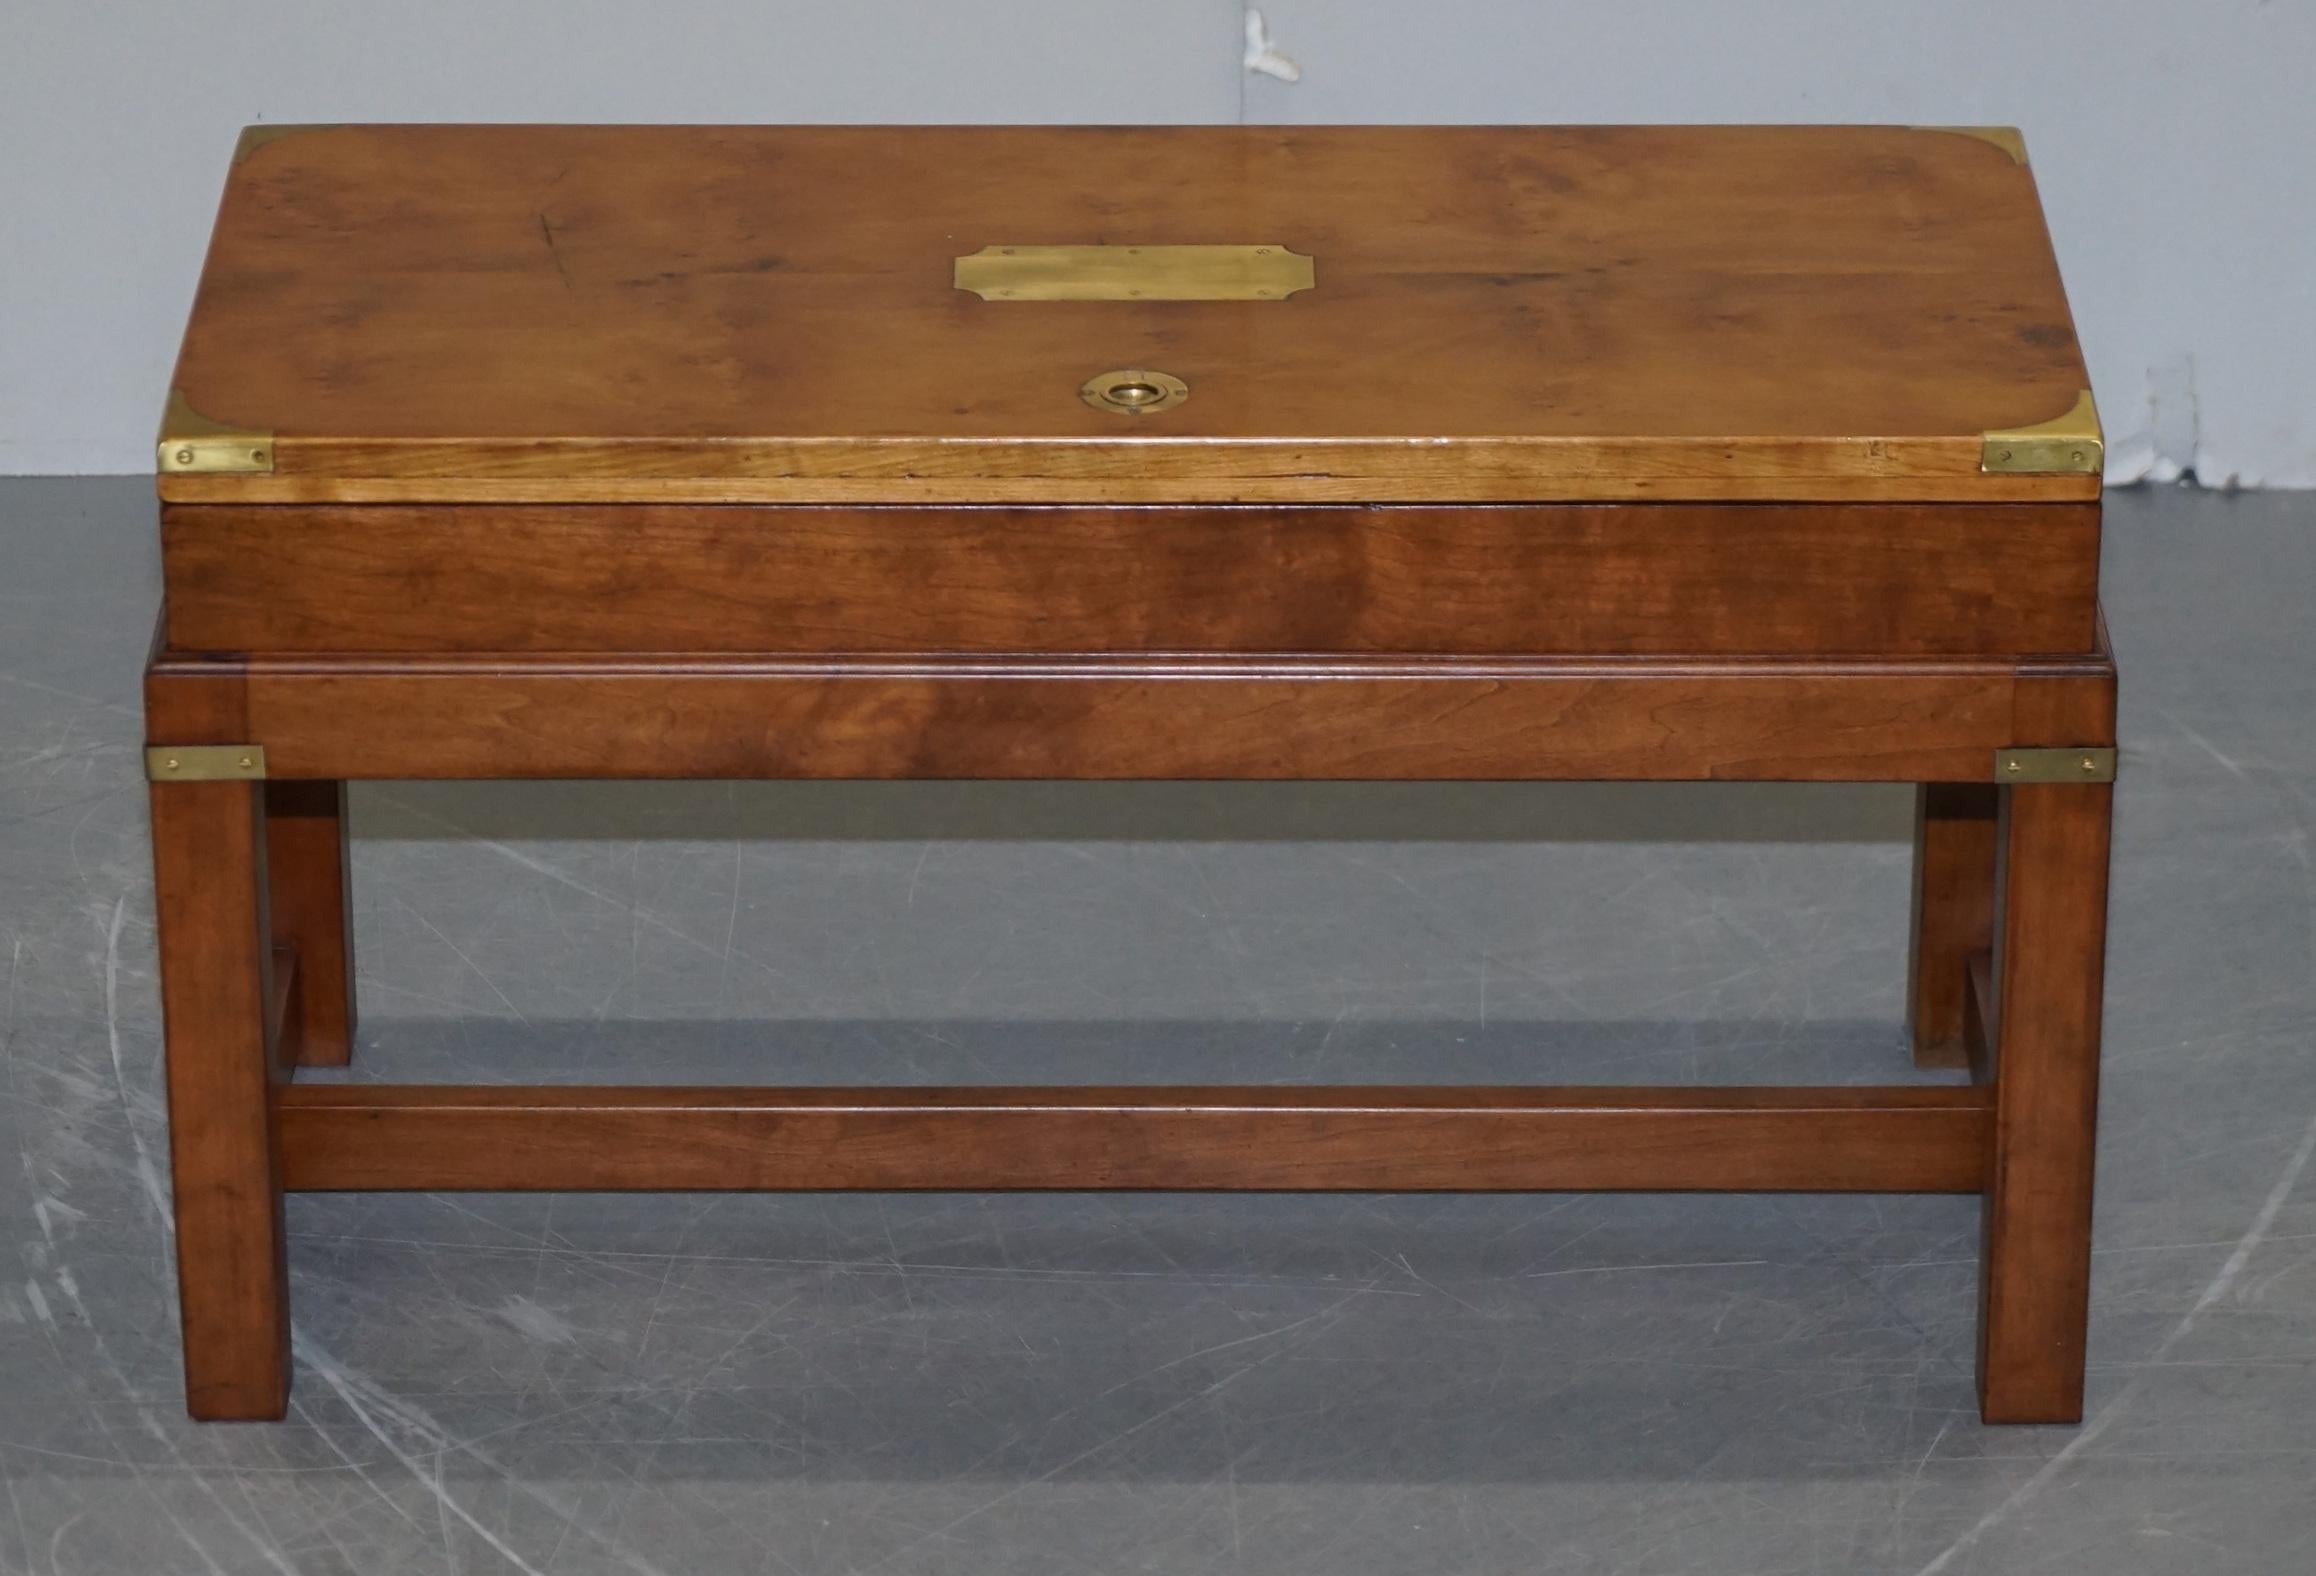 We are delighted to offer this very rare highly collectable Burr Yew Wood Military Campaign gun case with original stand formed as a coffee table

This is a very fine and rare piece of campaign furniture, I’ve in truth never seen another of this